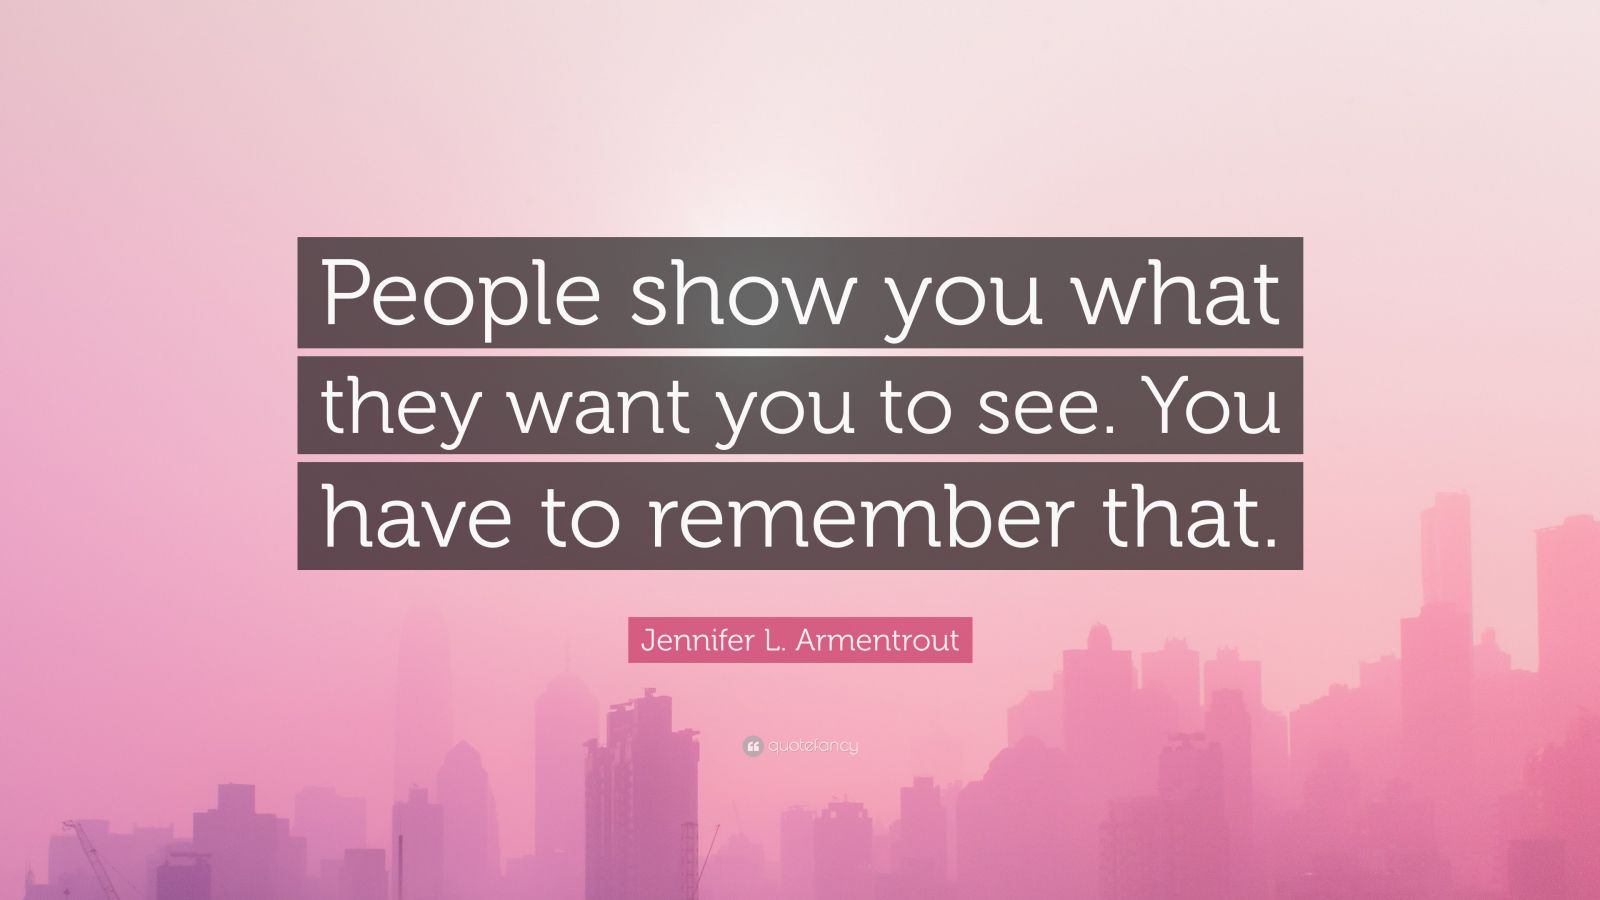 Jennifer L. Armentrout Quote: “People show you what they want you to see.  You have to remember that.”